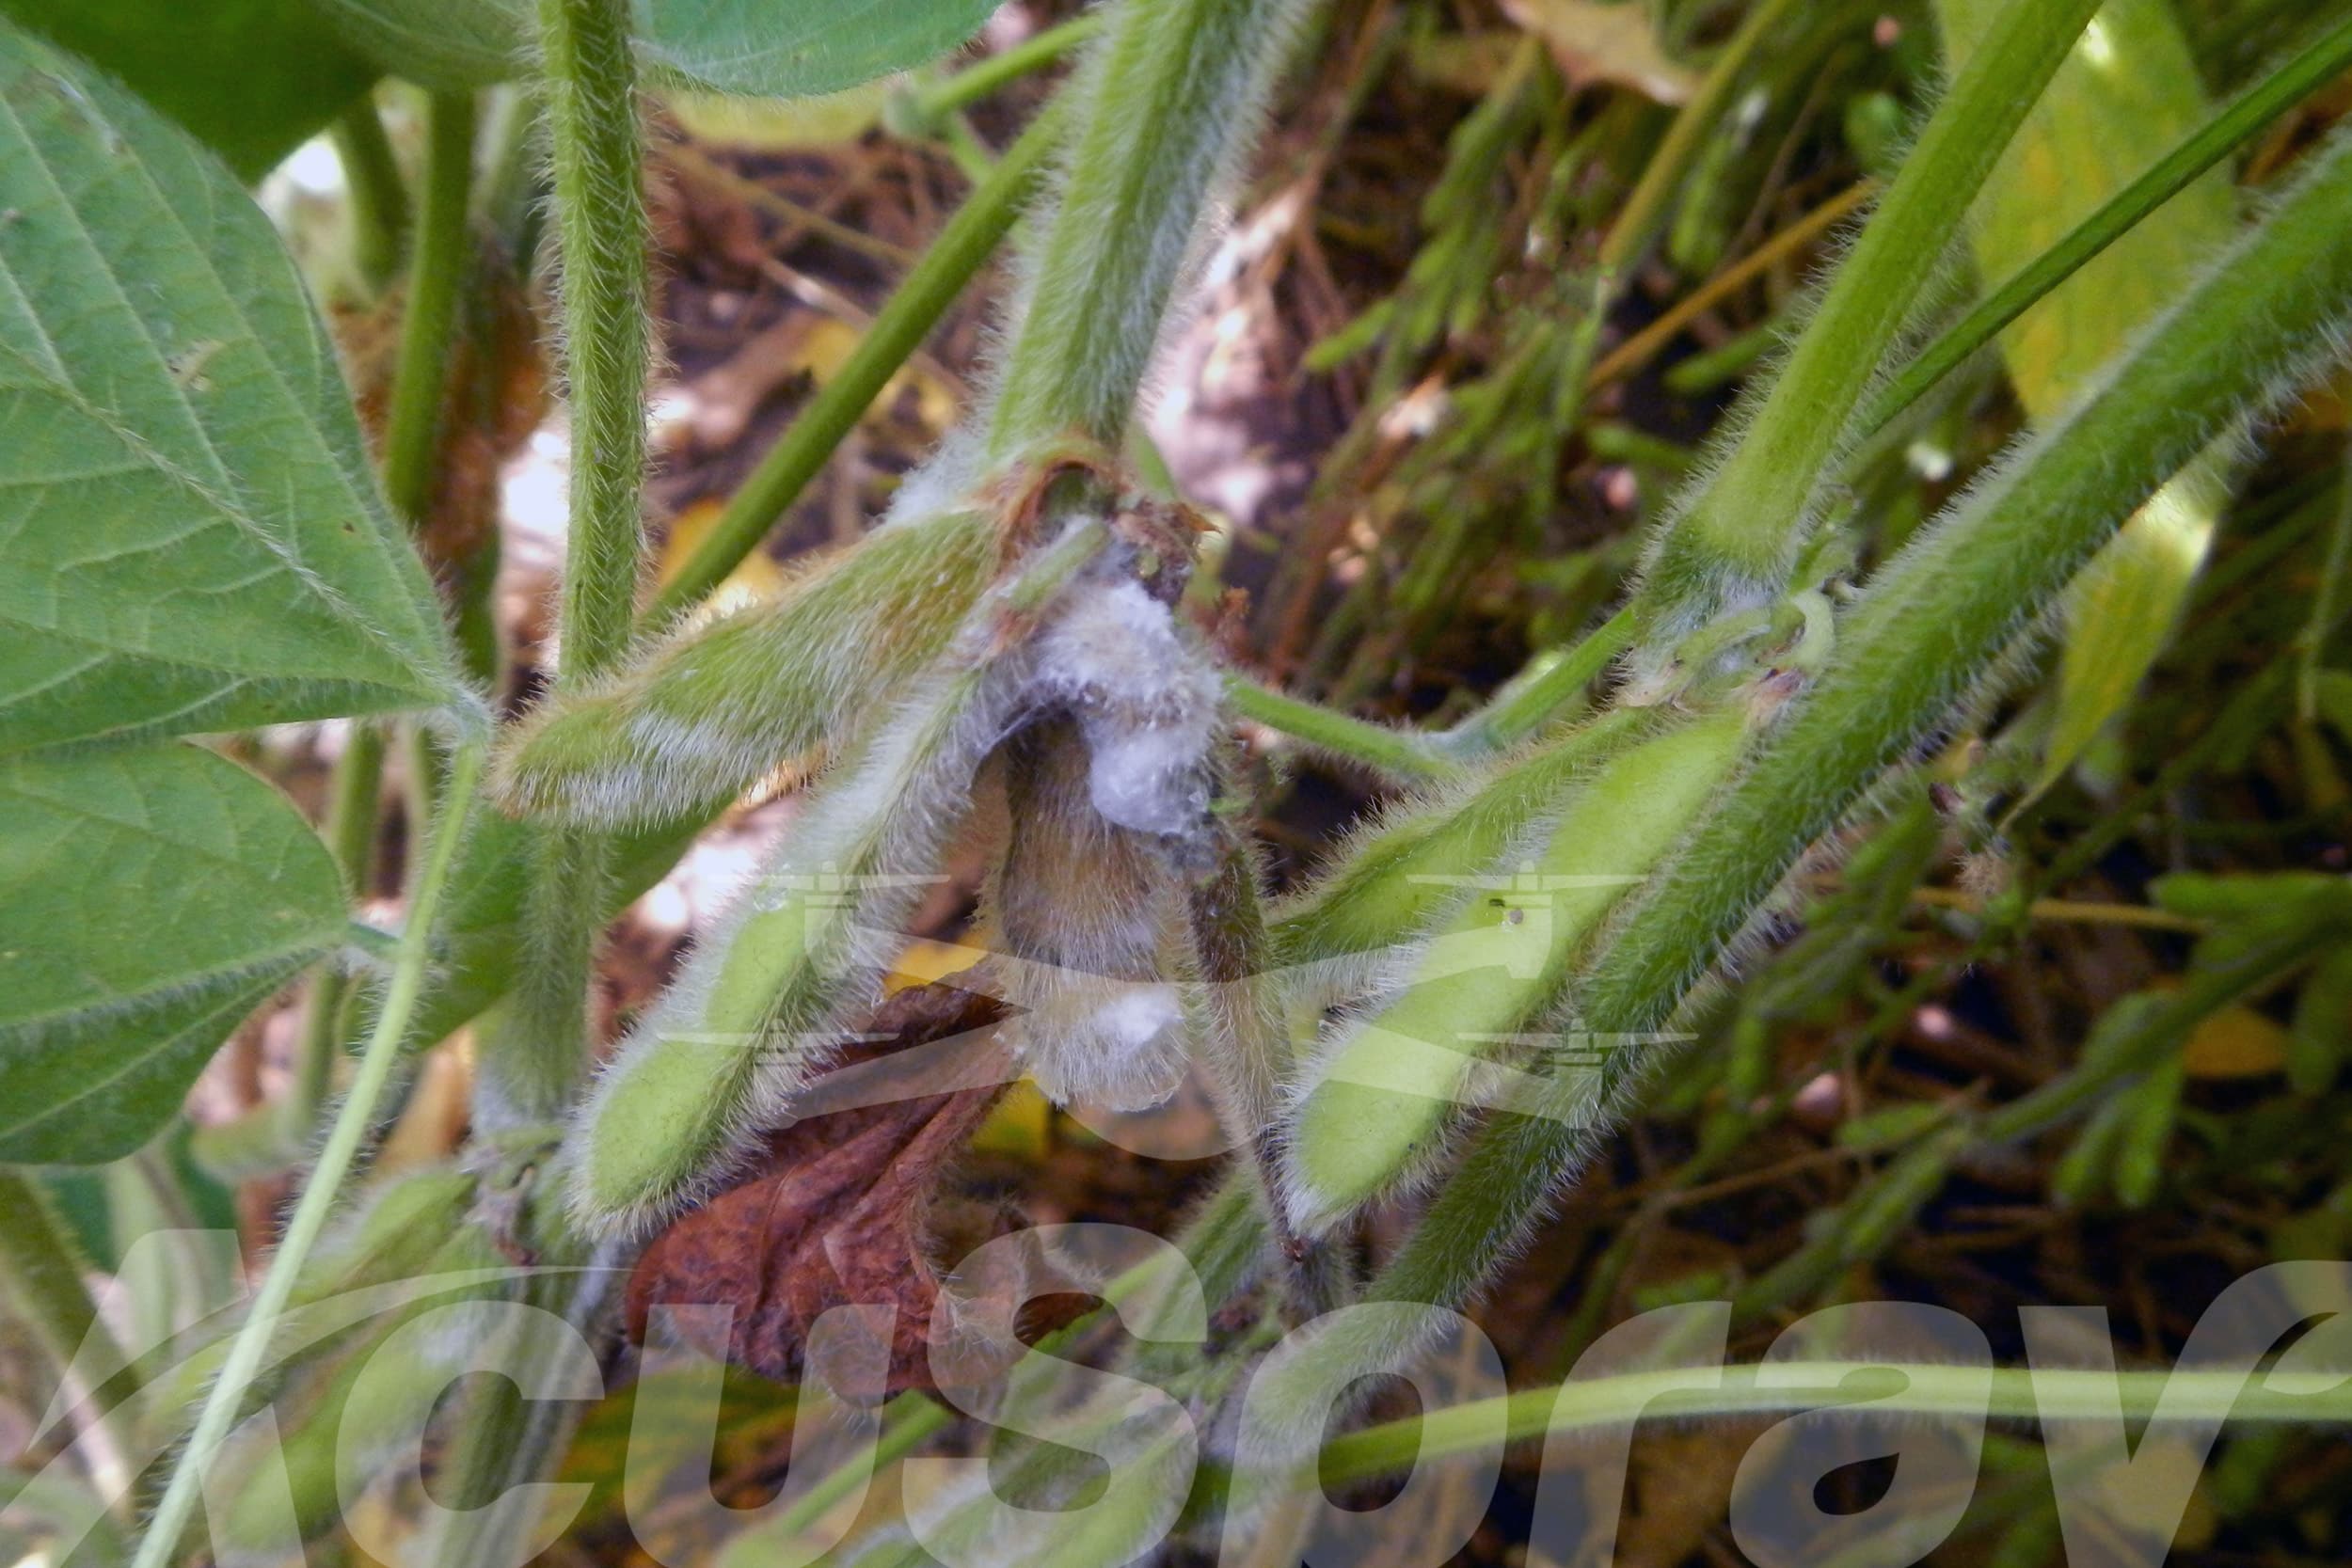 Close-up view of soybeans infected with white mold.